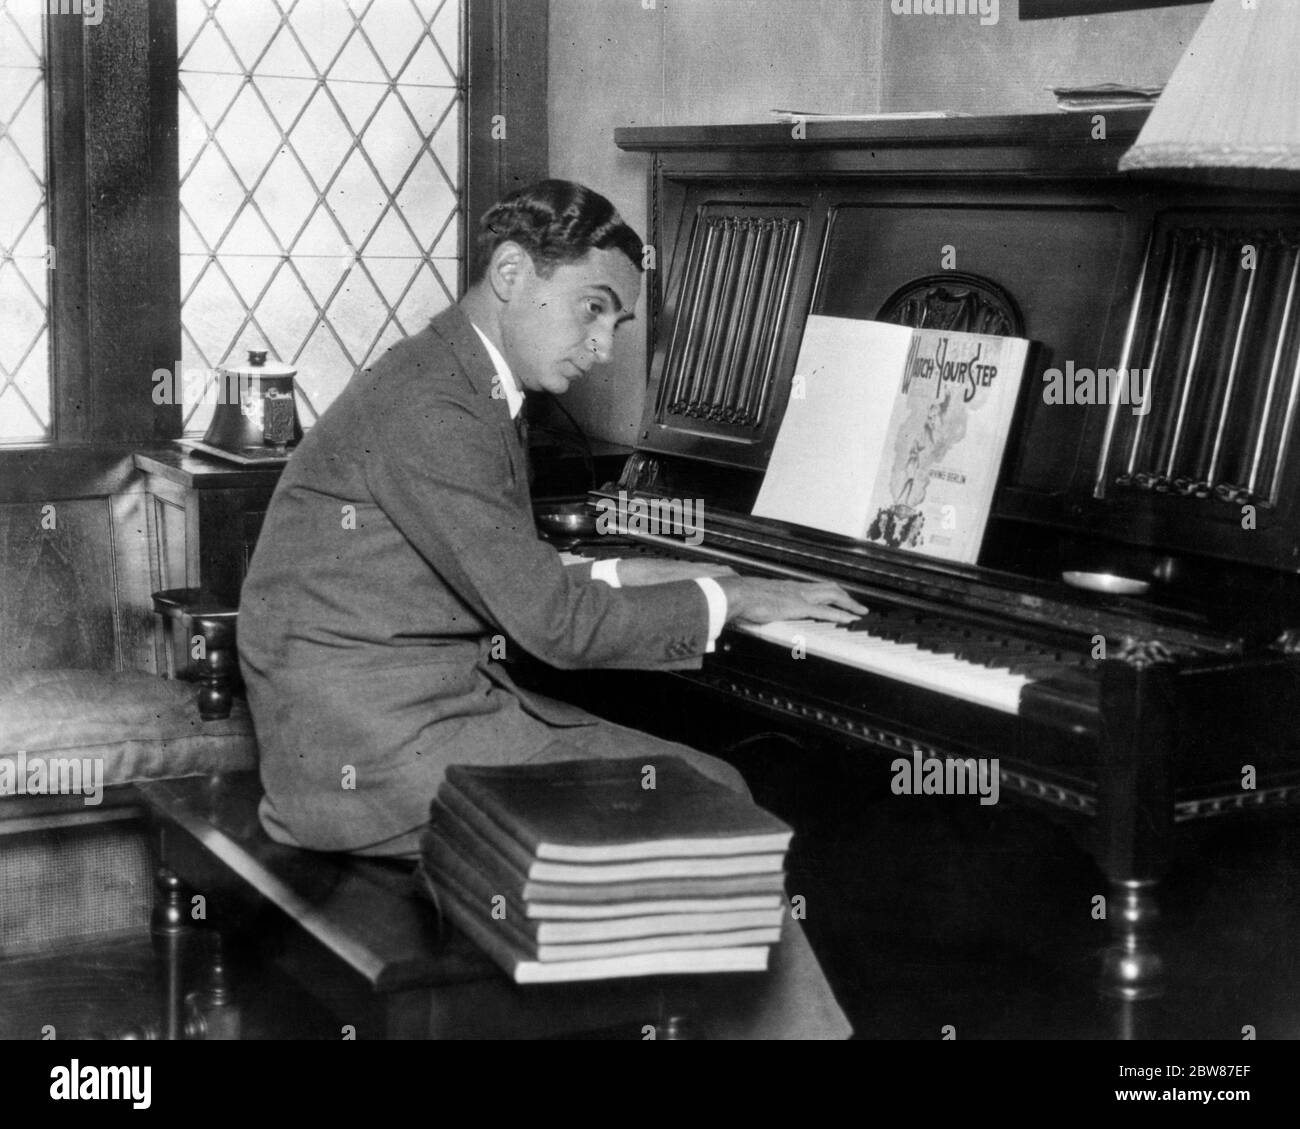 1910s 1920s TIN PAN ALLEY COMPOSER IRVING BERLIN AT PIANO KEYBOARD LOOKING AT SHEET MUSIC FOR HIS DEBUT MUSICAL WATCH YOUR STEP - asp fwp1945 ASP001 HARS CONFIDENCE B&W SUCCESS PERFORMING ARTS HAPPINESS BERLIN HIS KNOWLEDGE LEADERSHIP INNOVATION PRIDE AT AUTHORITY OCCUPATIONS COMPOSER CONCEPTUAL STYLISH CREATIVITY DEBUT MID-ADULT MID-ADULT MAN BLACK AND WHITE CAUCASIAN ETHNICITY HANDS ONLY IRVING OLD FASHIONED Stock Photo